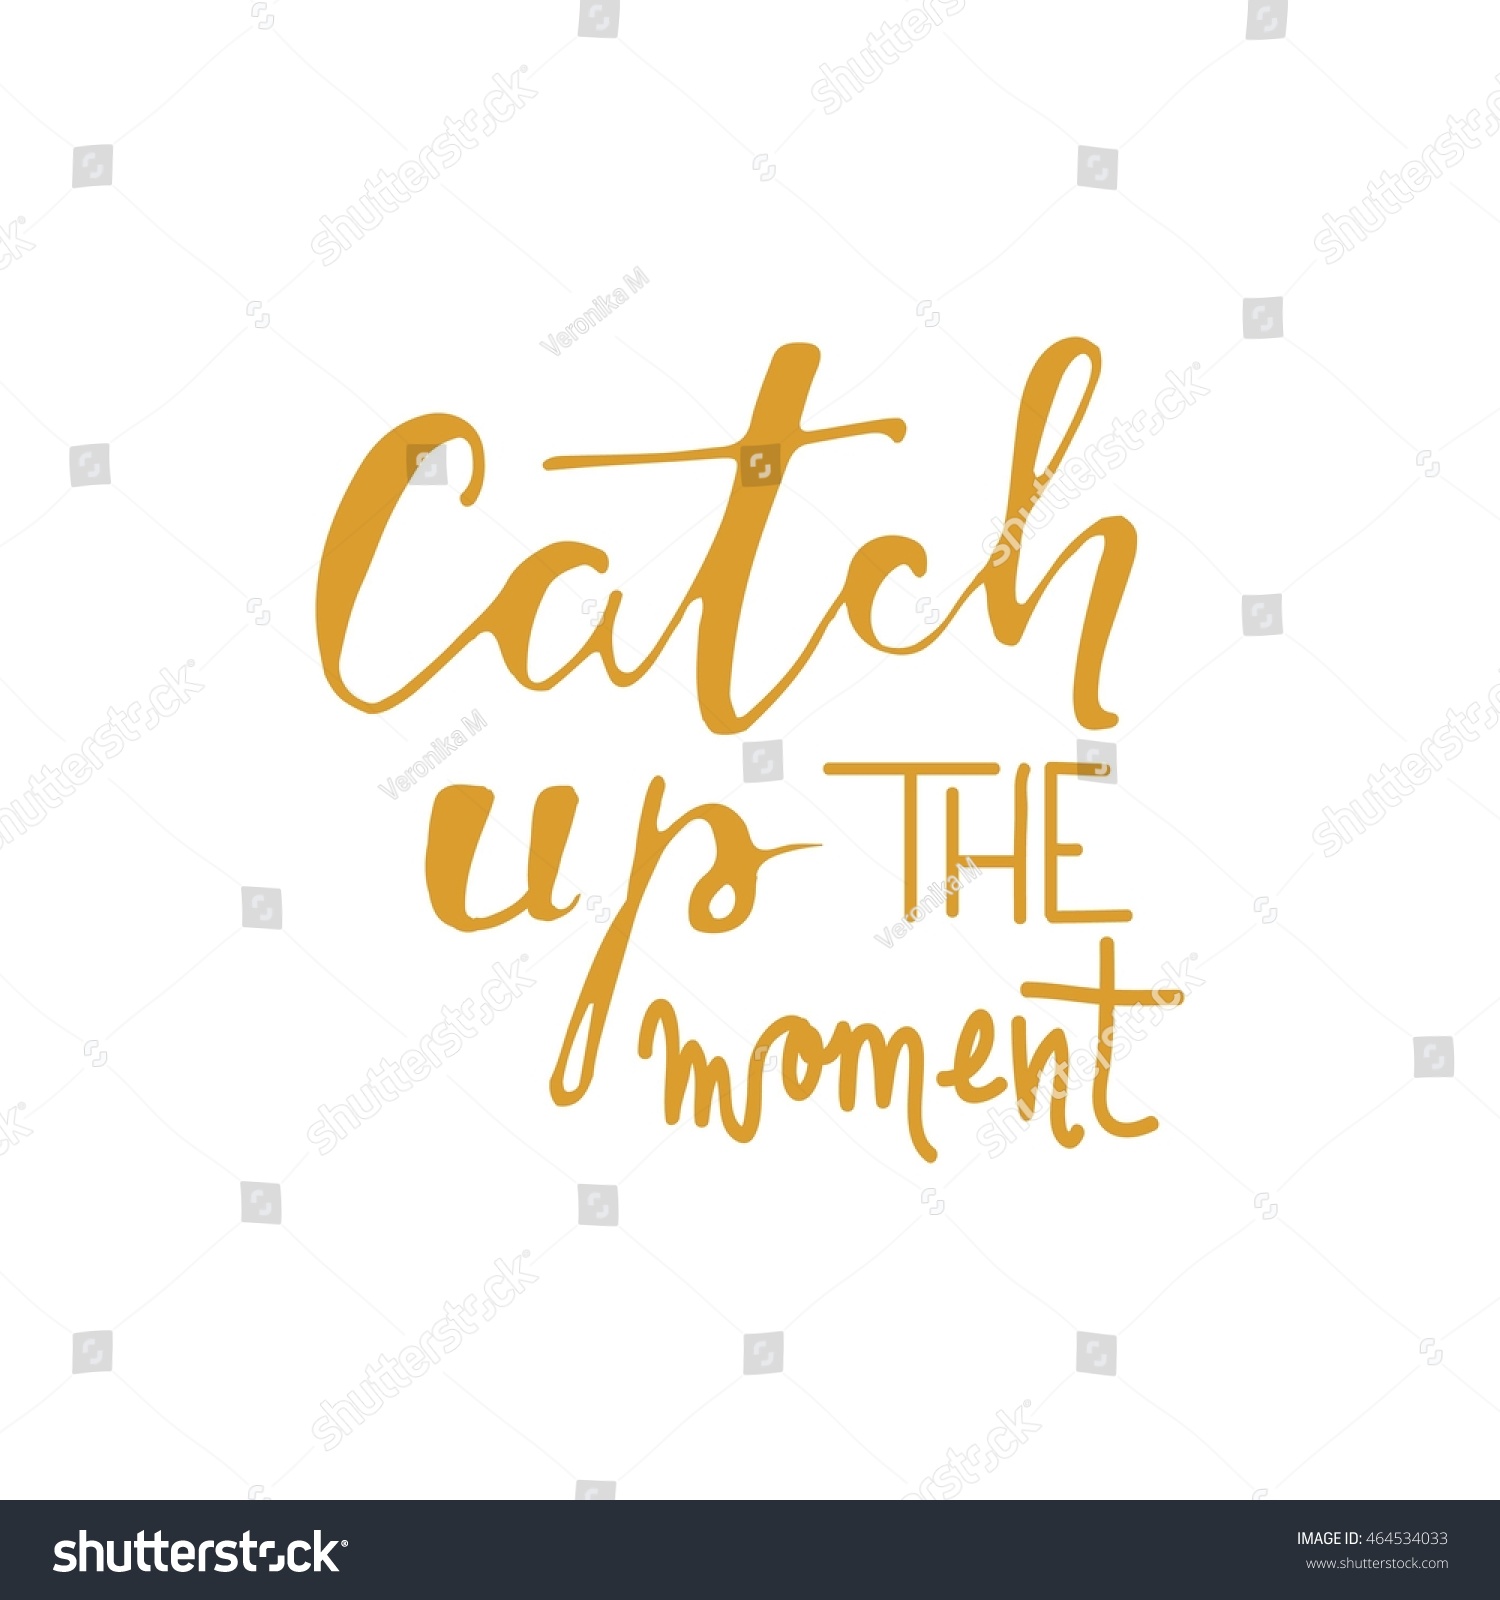 Catch Moment Motivational Quote Hand Lettering Stock Vector Royalty Free